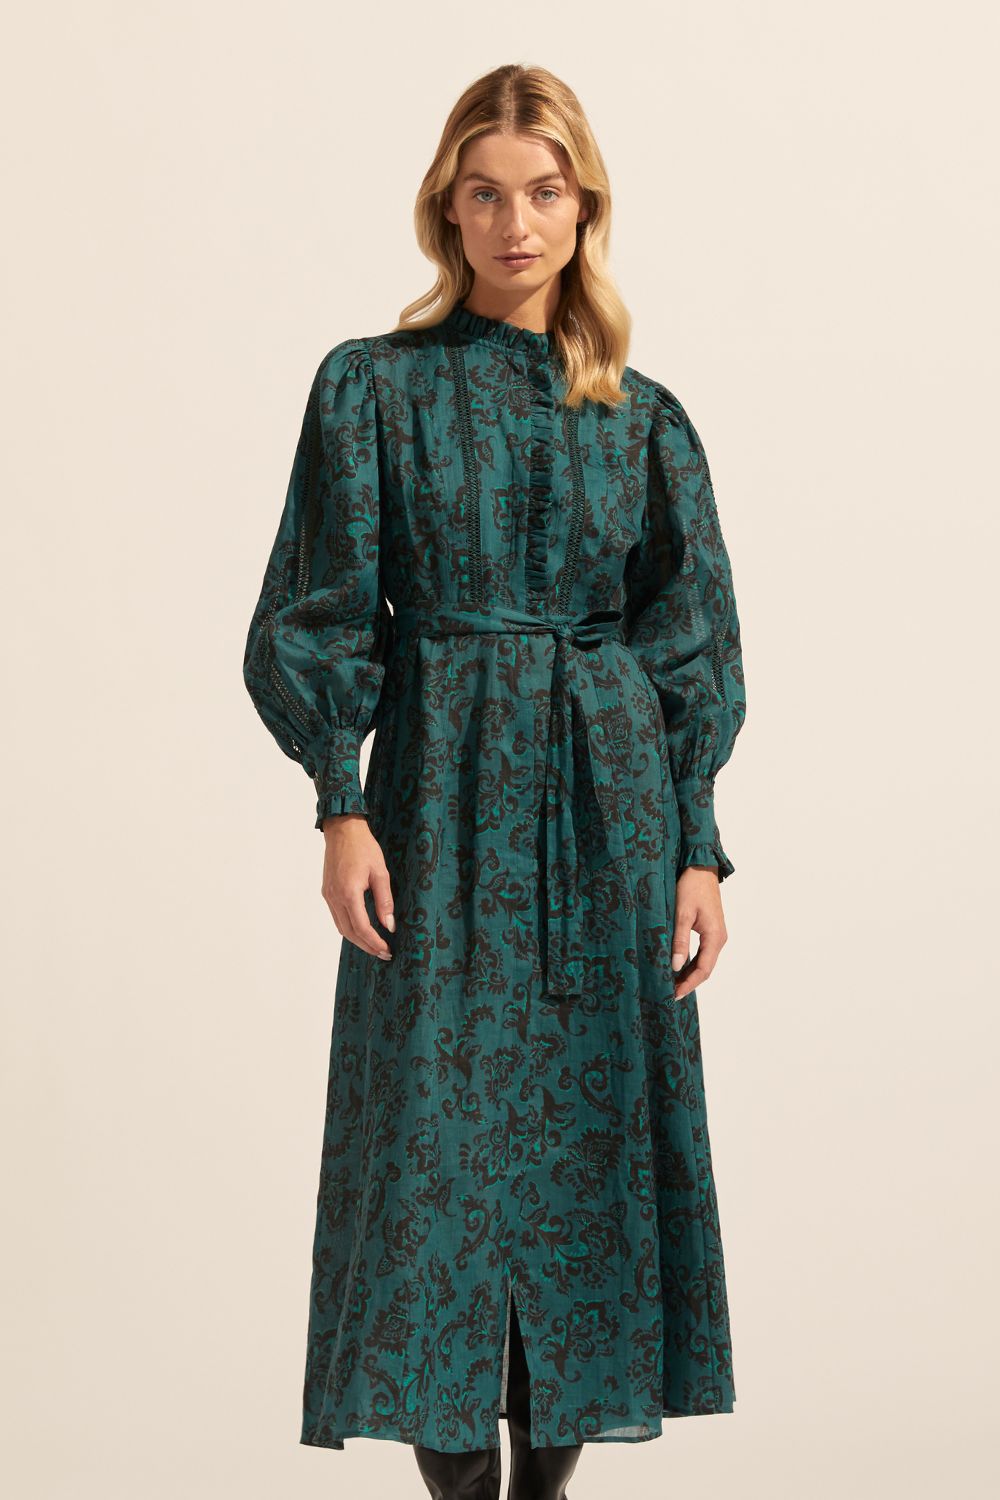 melody dress - green floral